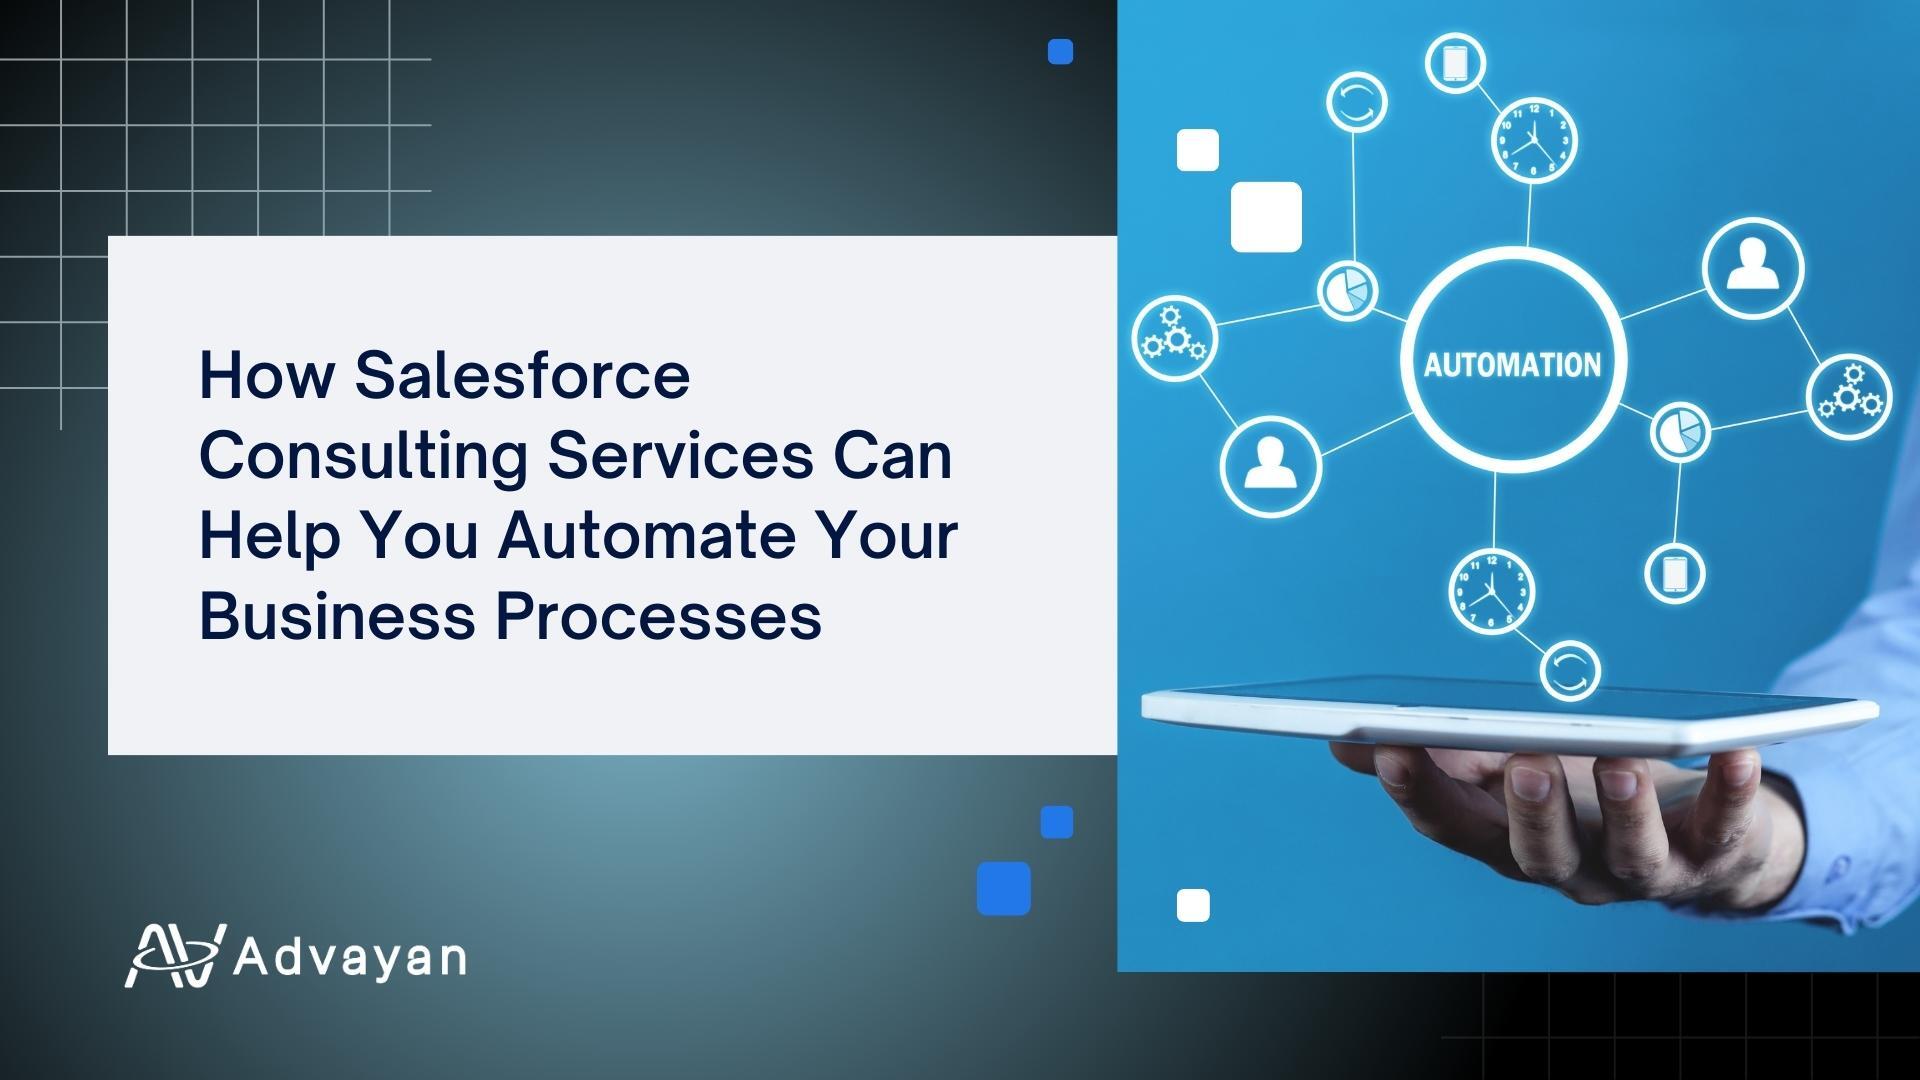 How Salesforce Consulting Services Can Help You Automate Your Business Processes